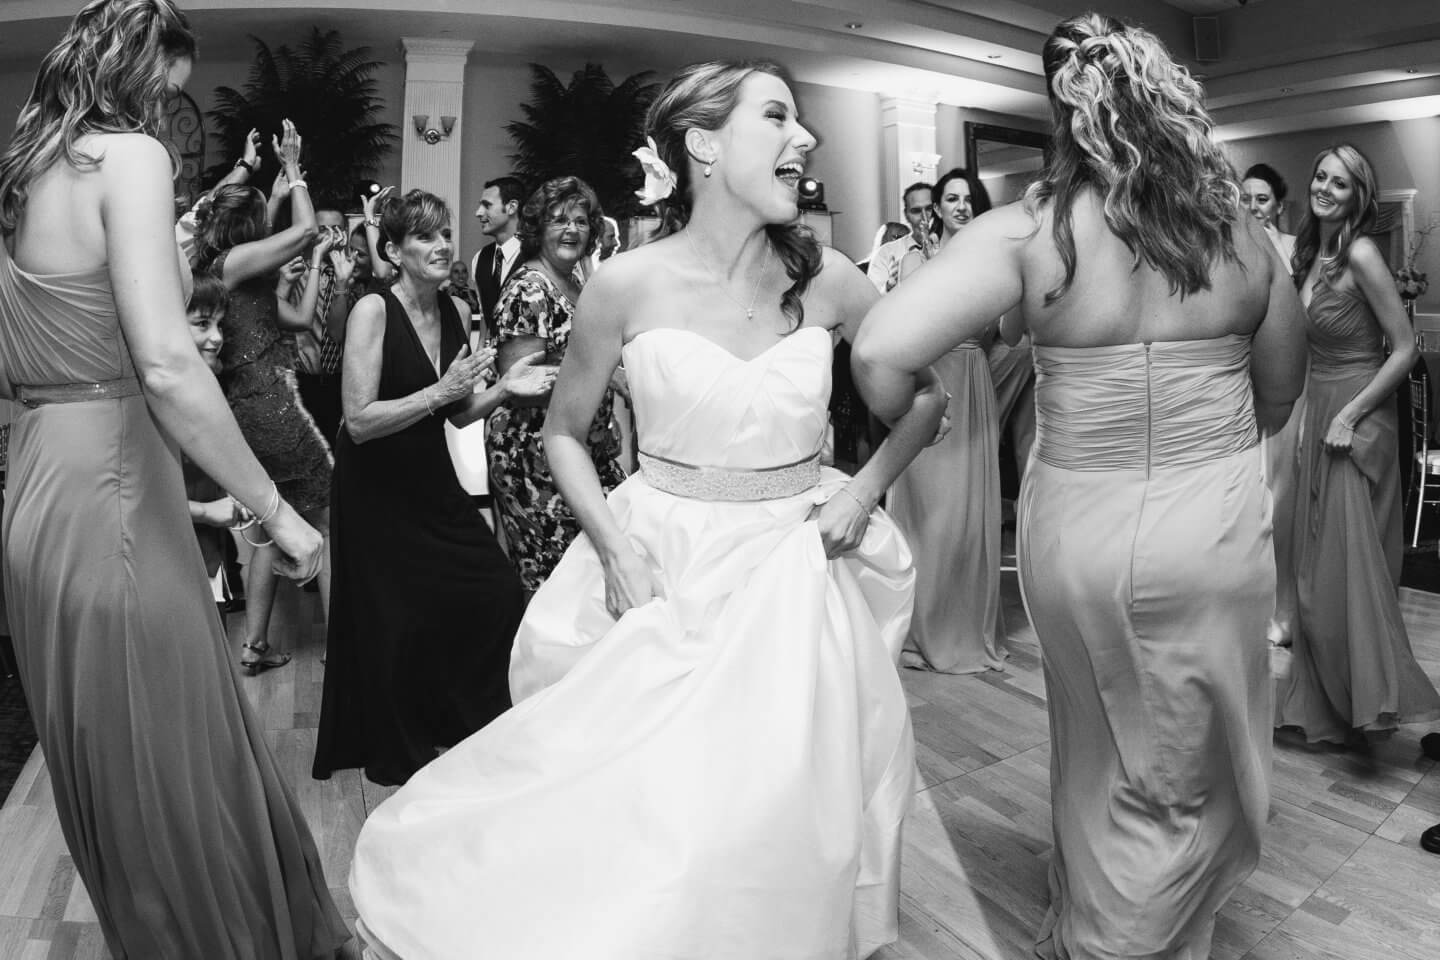 WEDDING SONG CHECKLIST - Create Excitement - Professional DJ Service in  Monmouth County New Jersey